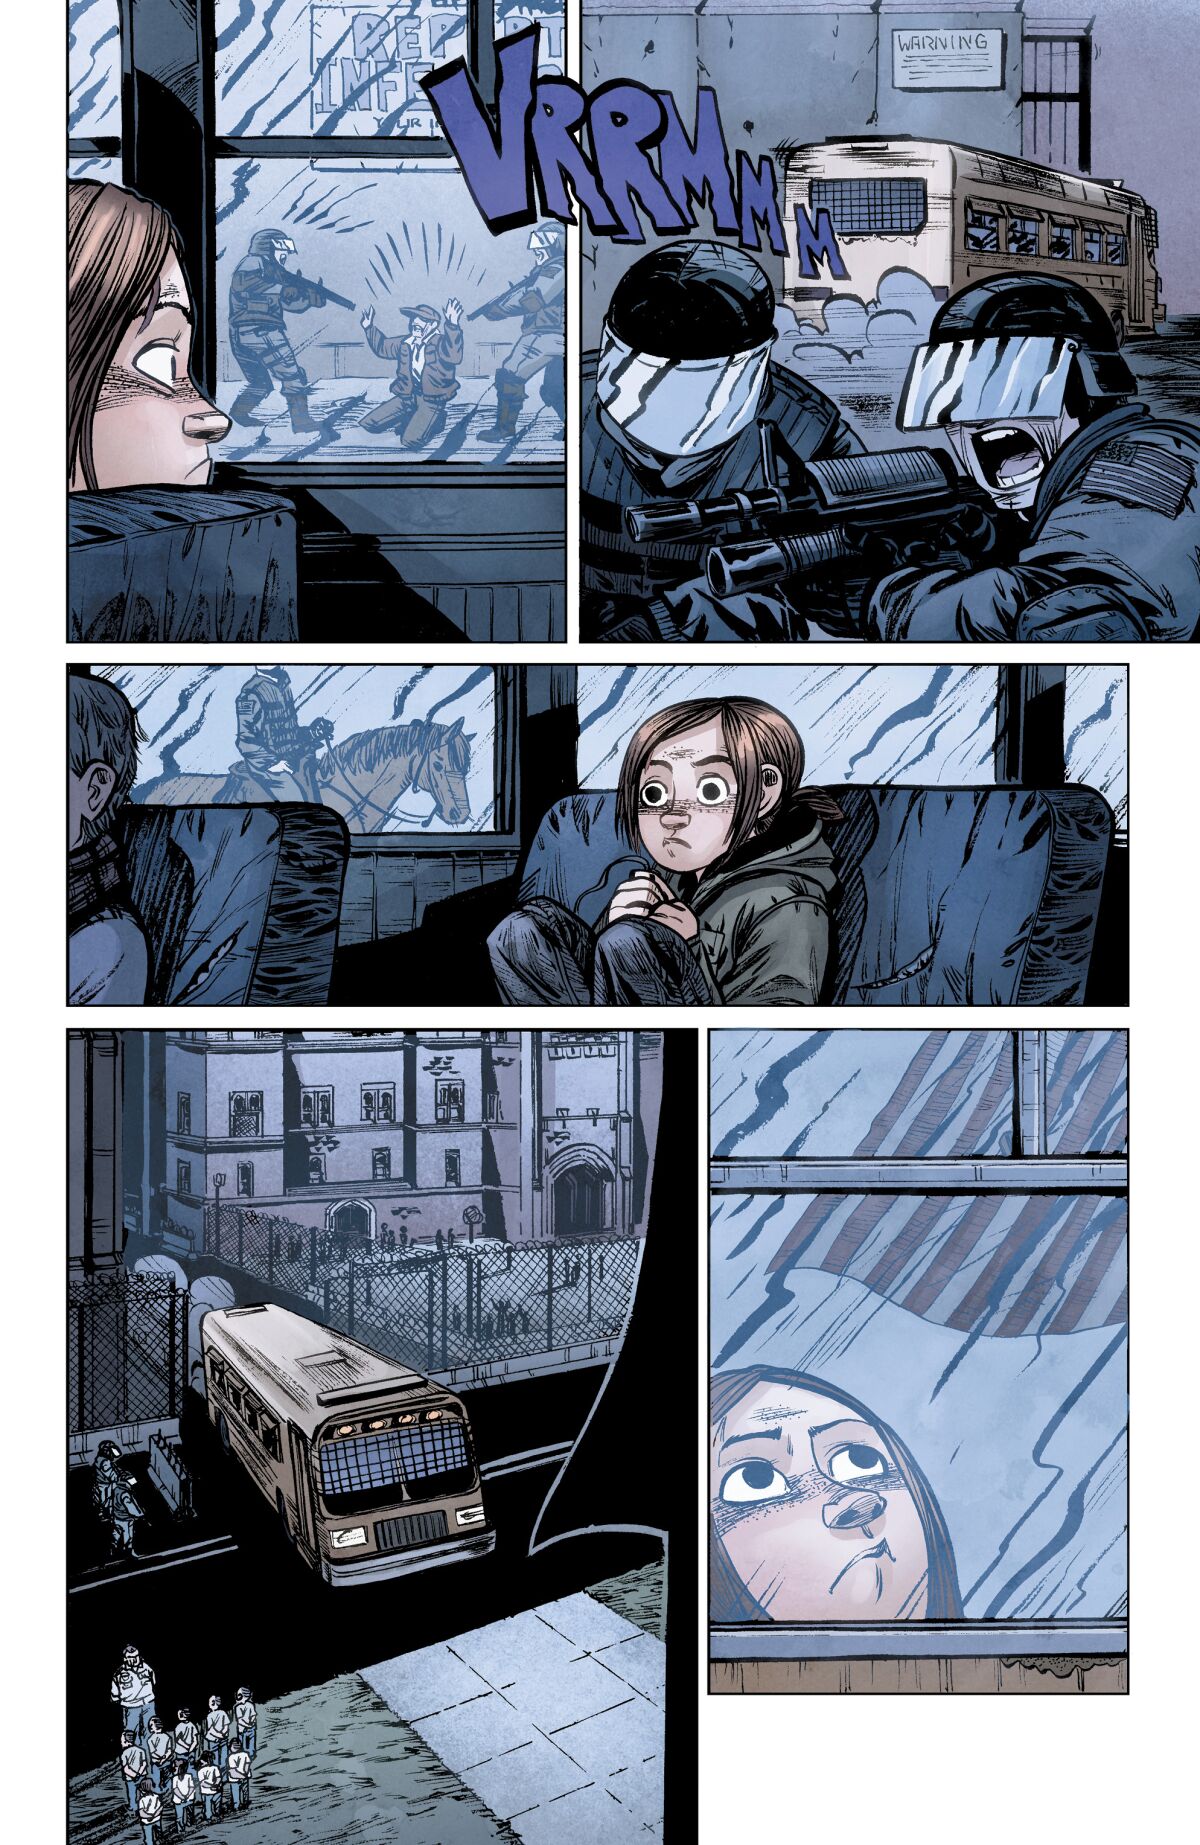 A comic book page showing a young girl on a school bus headed to a military school